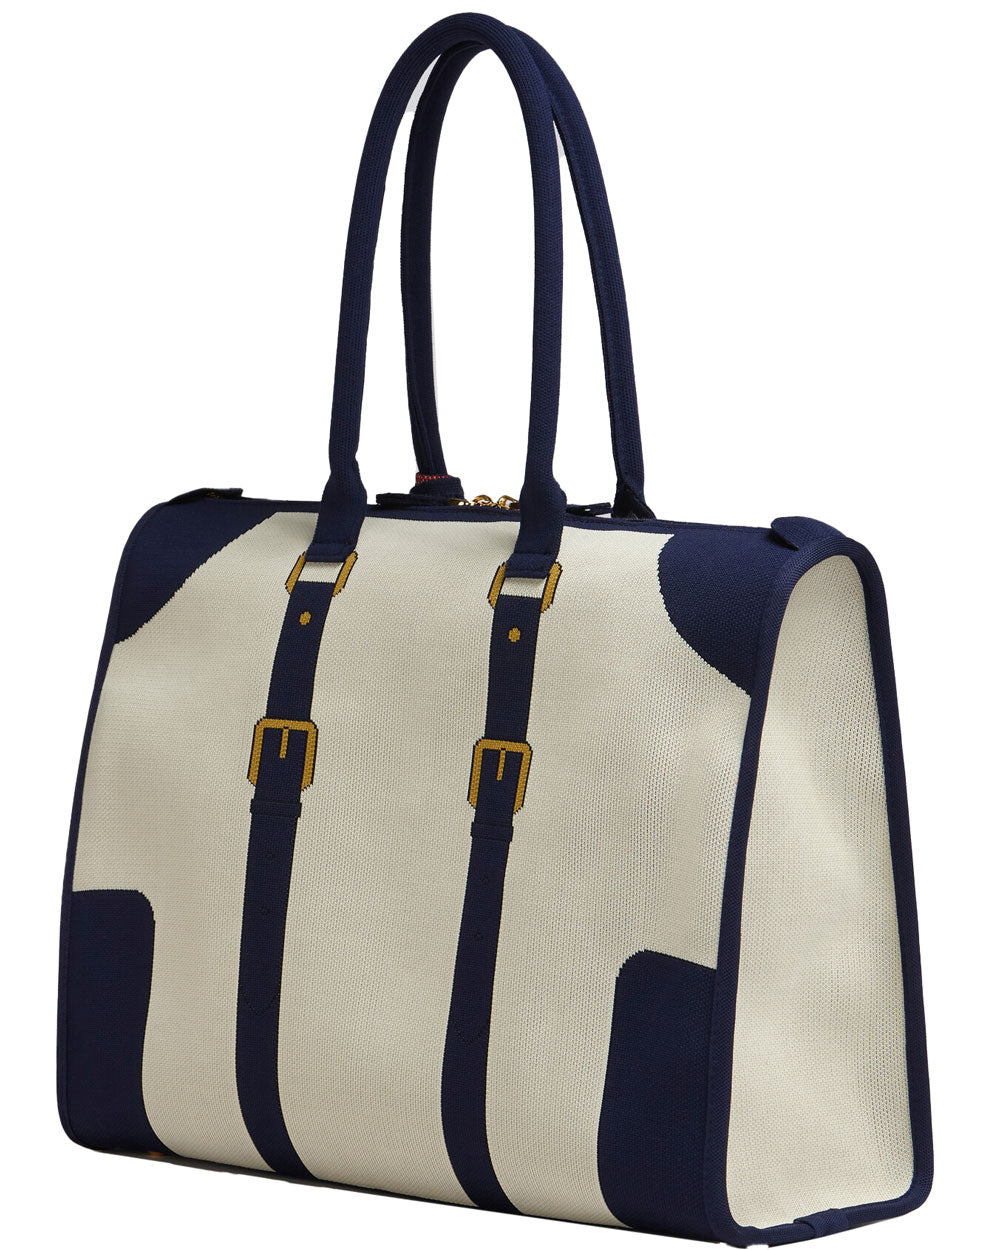 Small Travel Bag in Navy